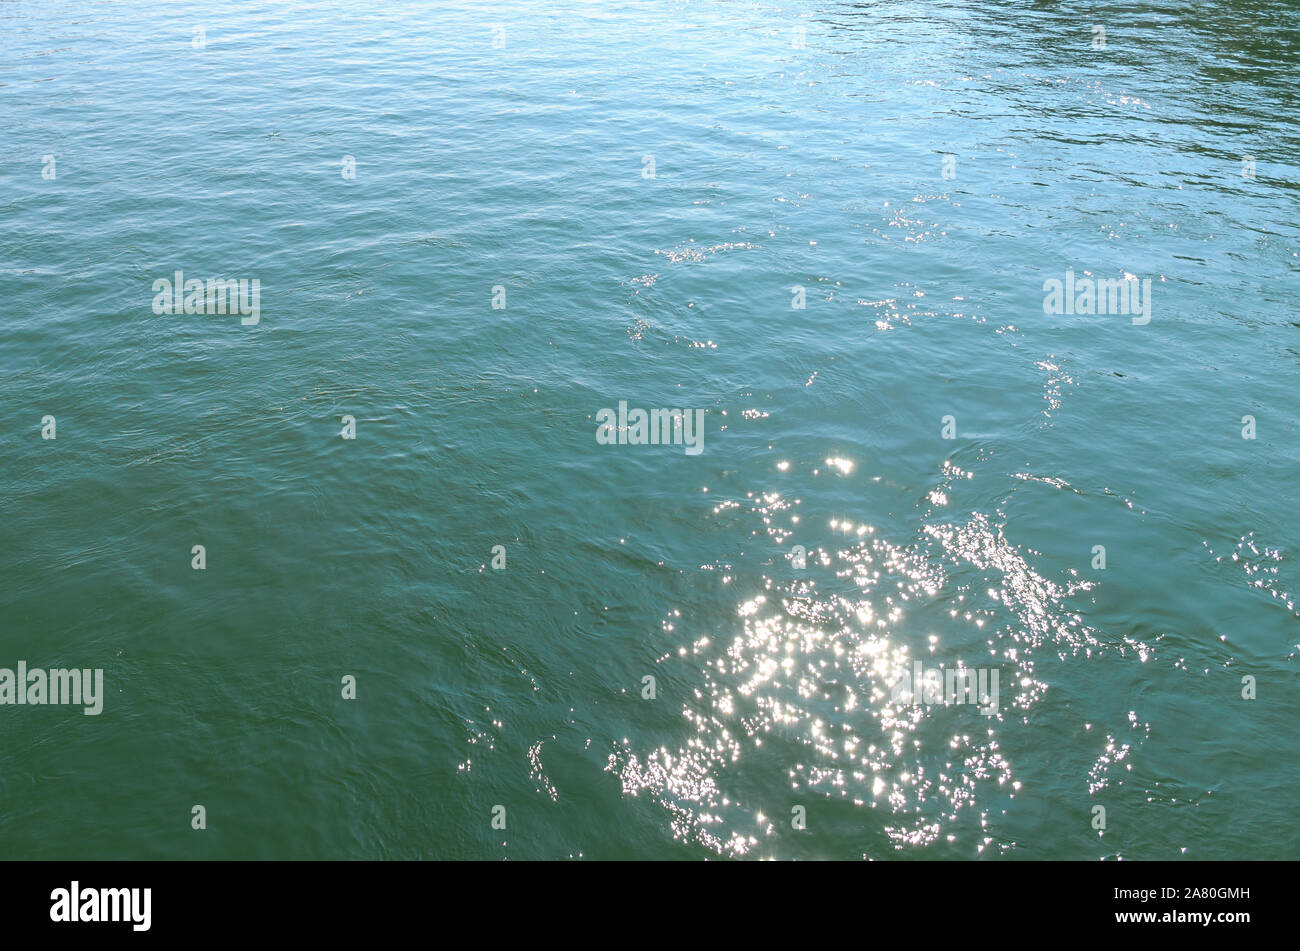 Background texture of sparkling rippling water in a river with reflections of the sunlight causing specular highlights Stock Photo